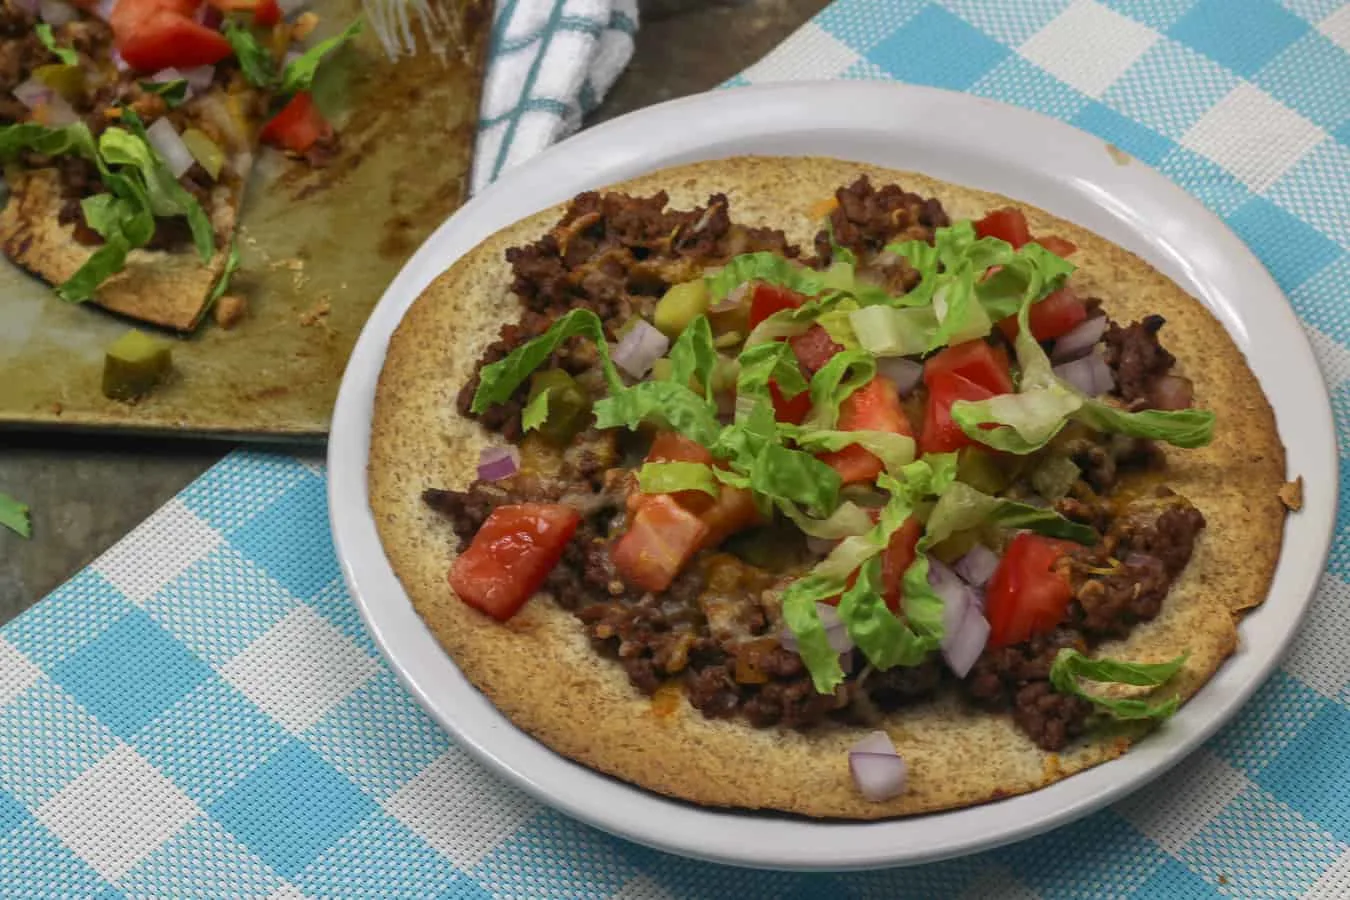 If you are a pizza lover like me, finding healthier alternatives while on the Weight Watchers program is a must! This Weight Watchers cheeseburger pizza recipe is great!